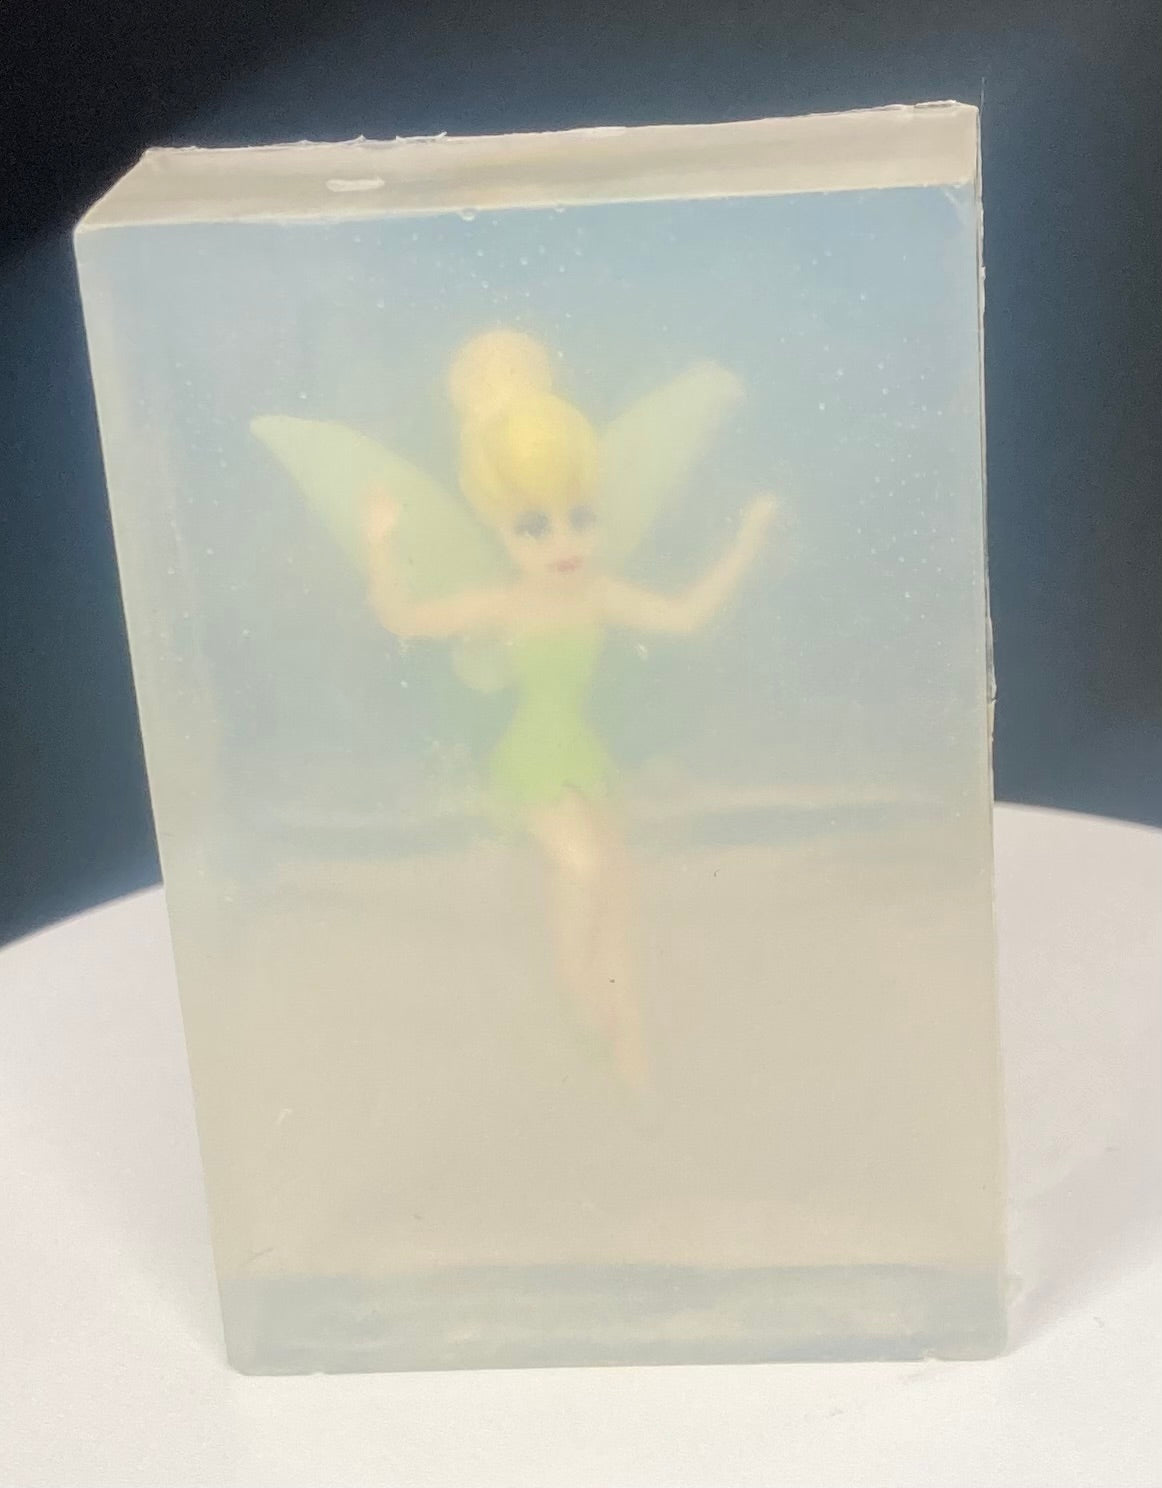 Tinkerbell Toy in a Bar of Glycerin Soap